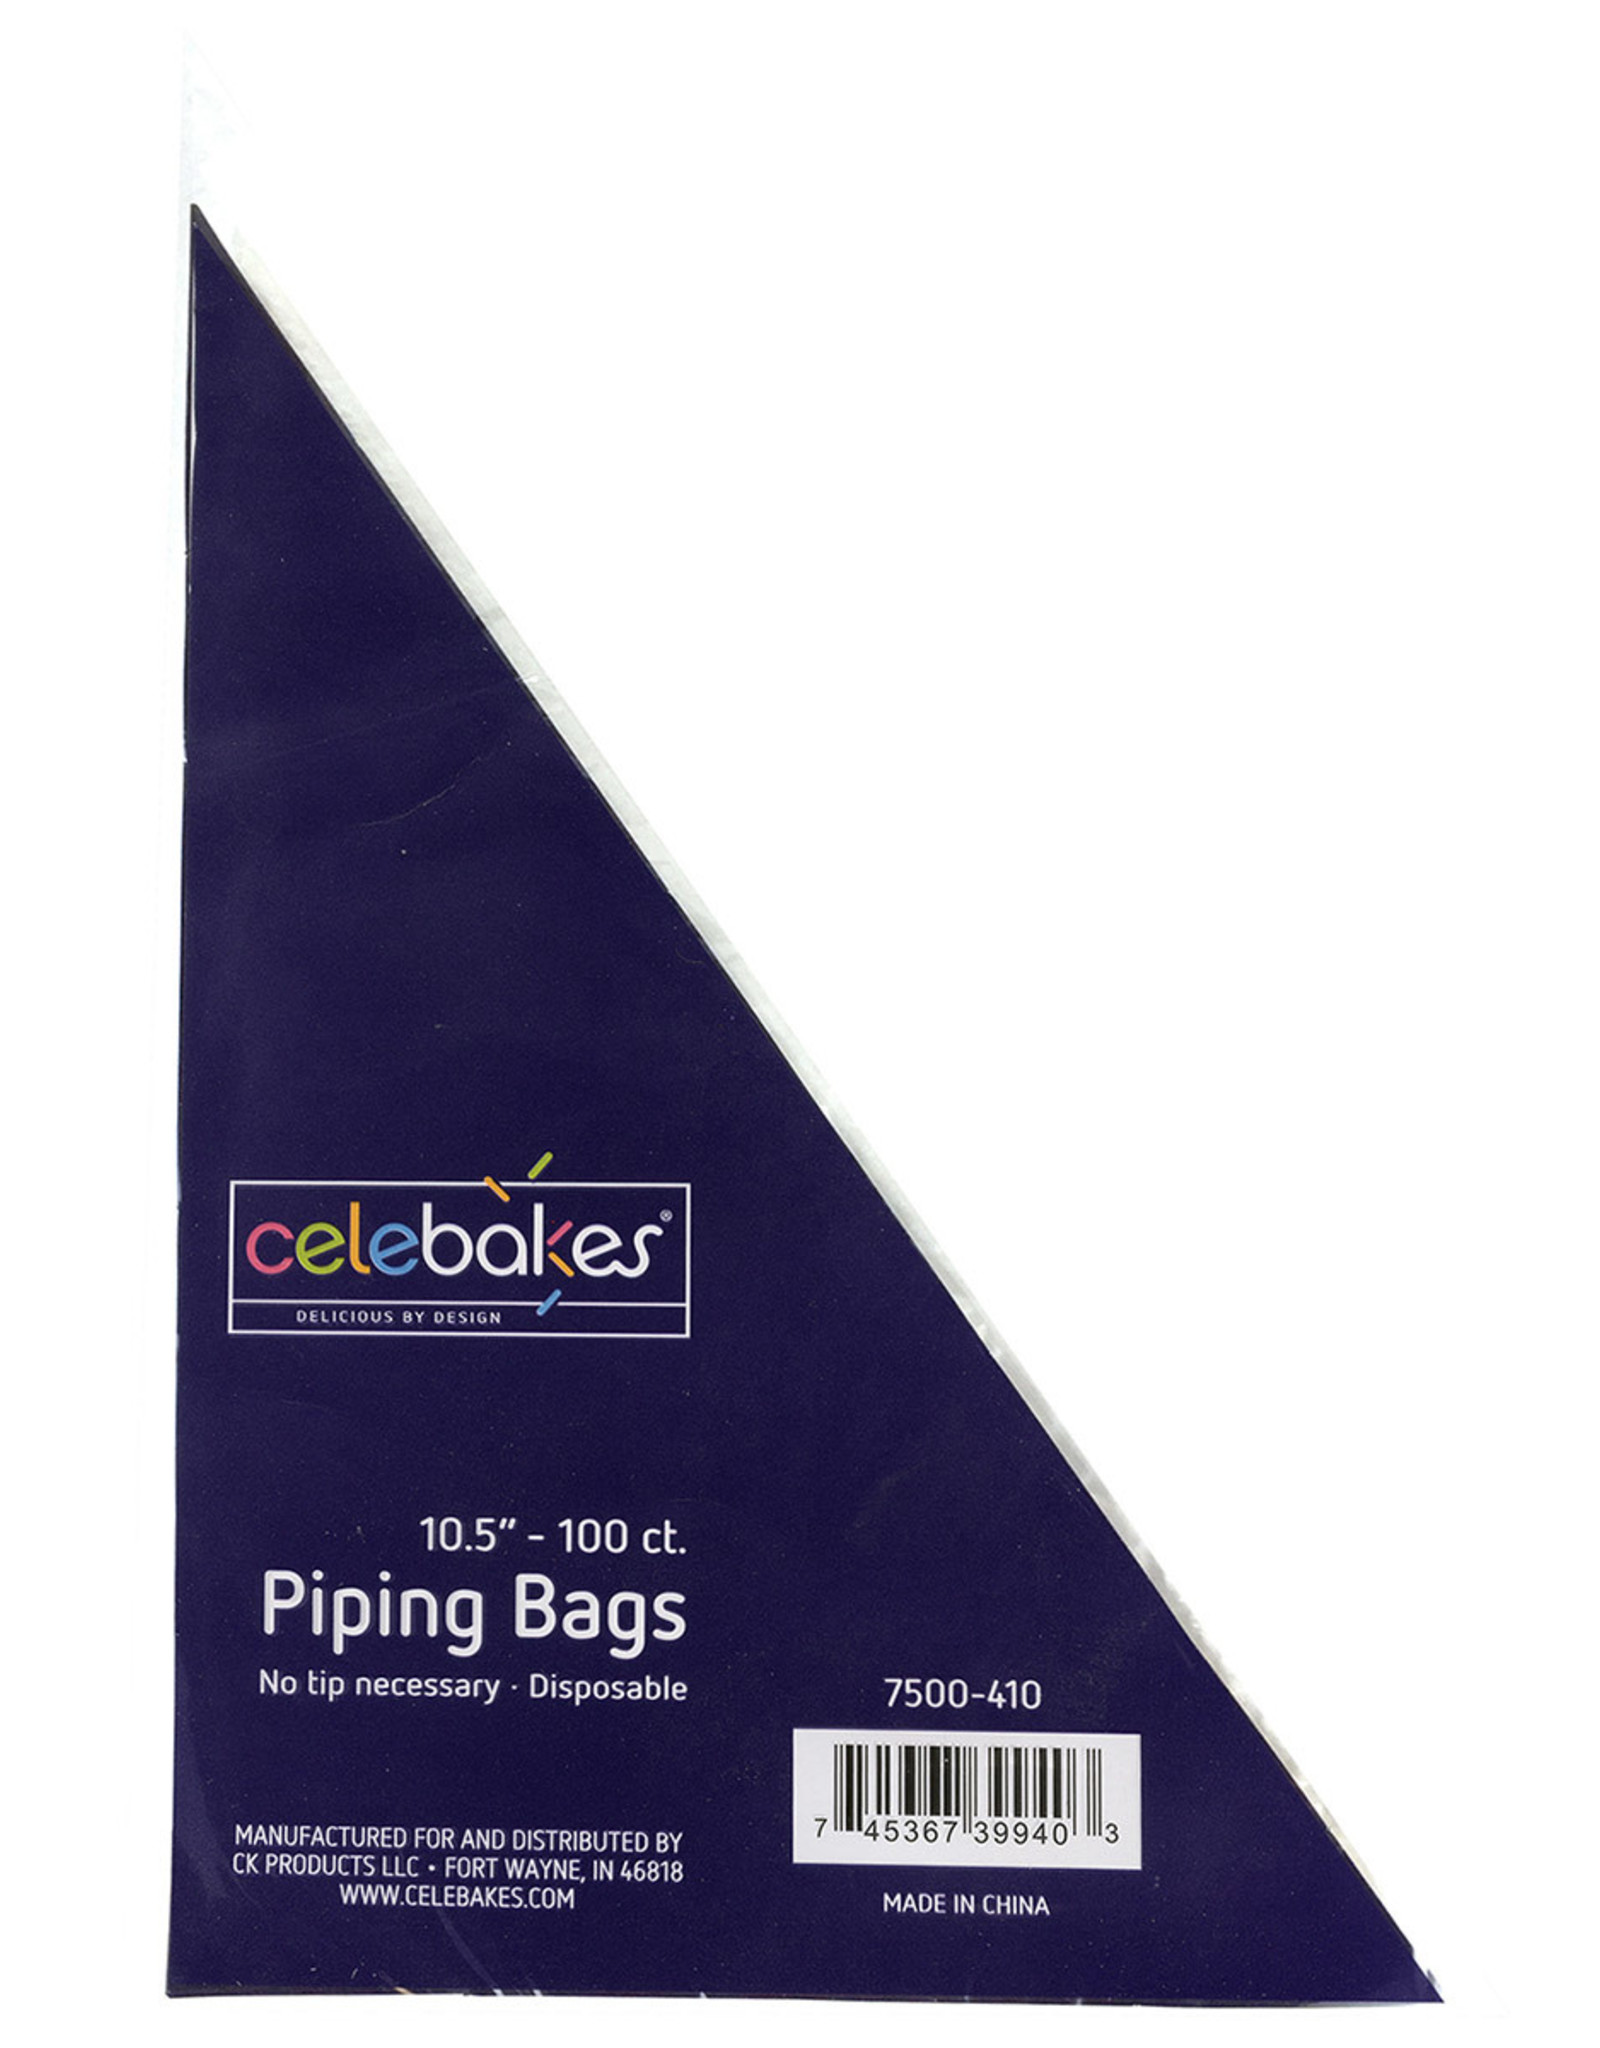 Celebakes Tipless Bags - 10.5" (100ct)